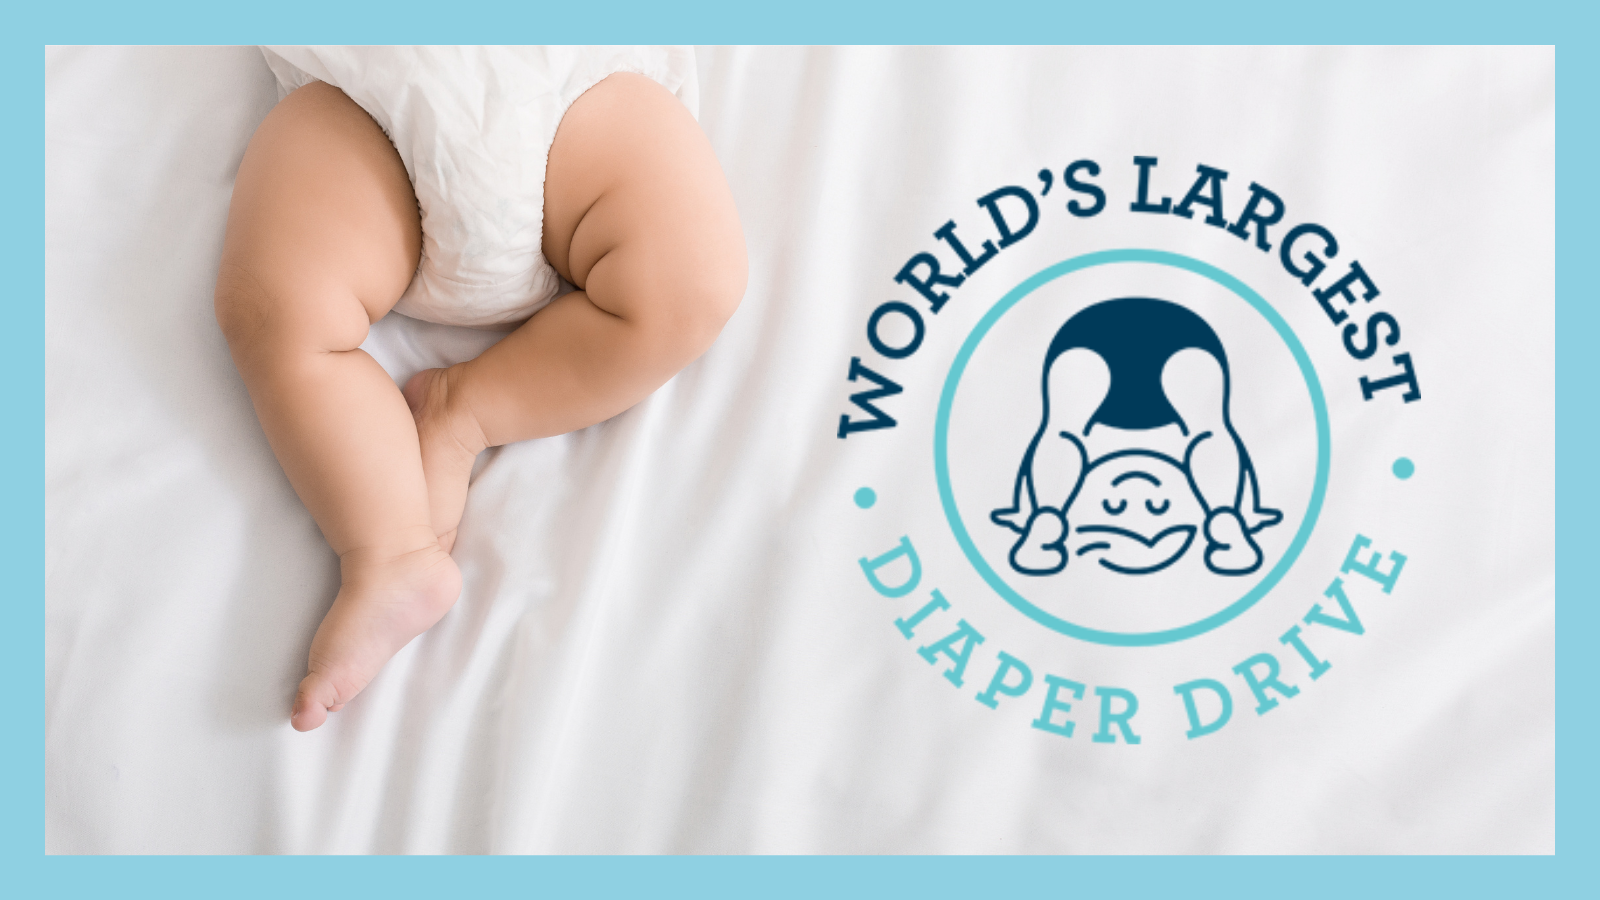 Worlds largest diaper drive logo with baby legs